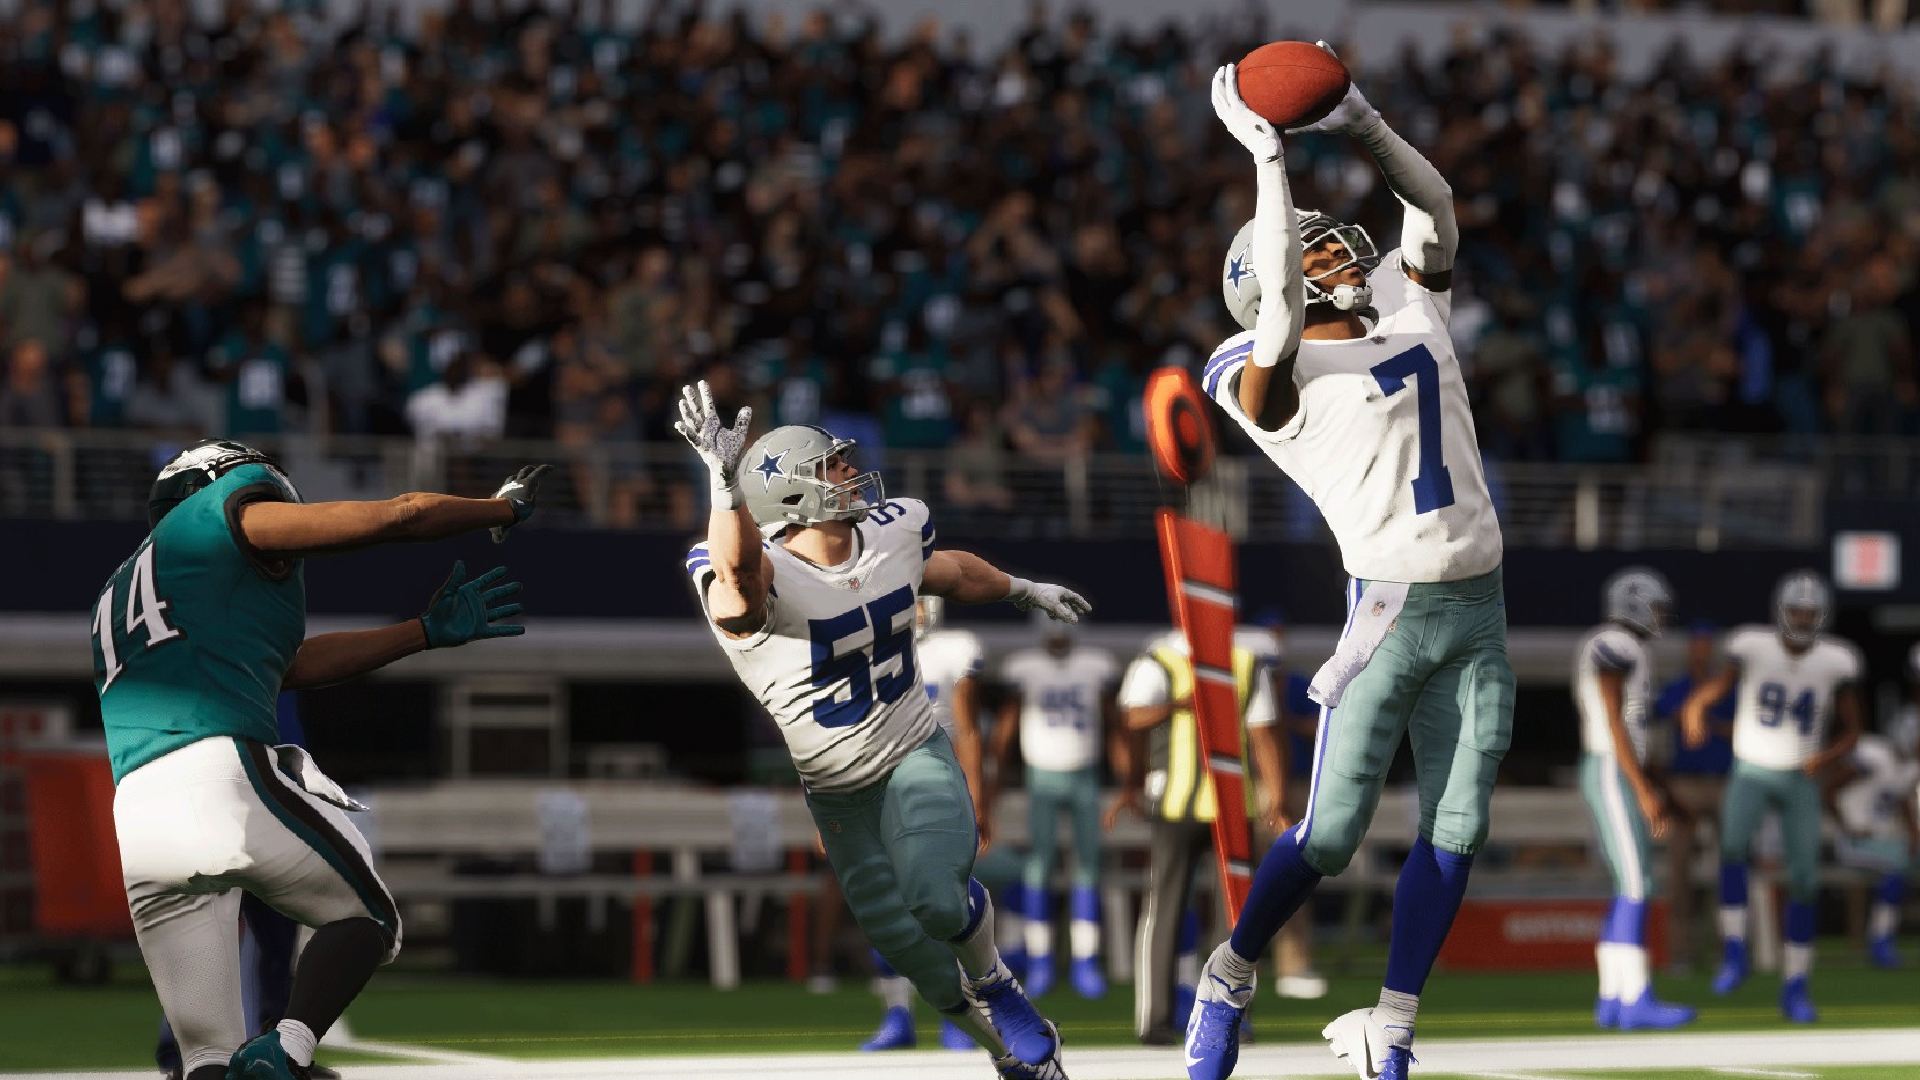 Madden 23 Dual Entitlement: How to upgrade from PS4 to PS5